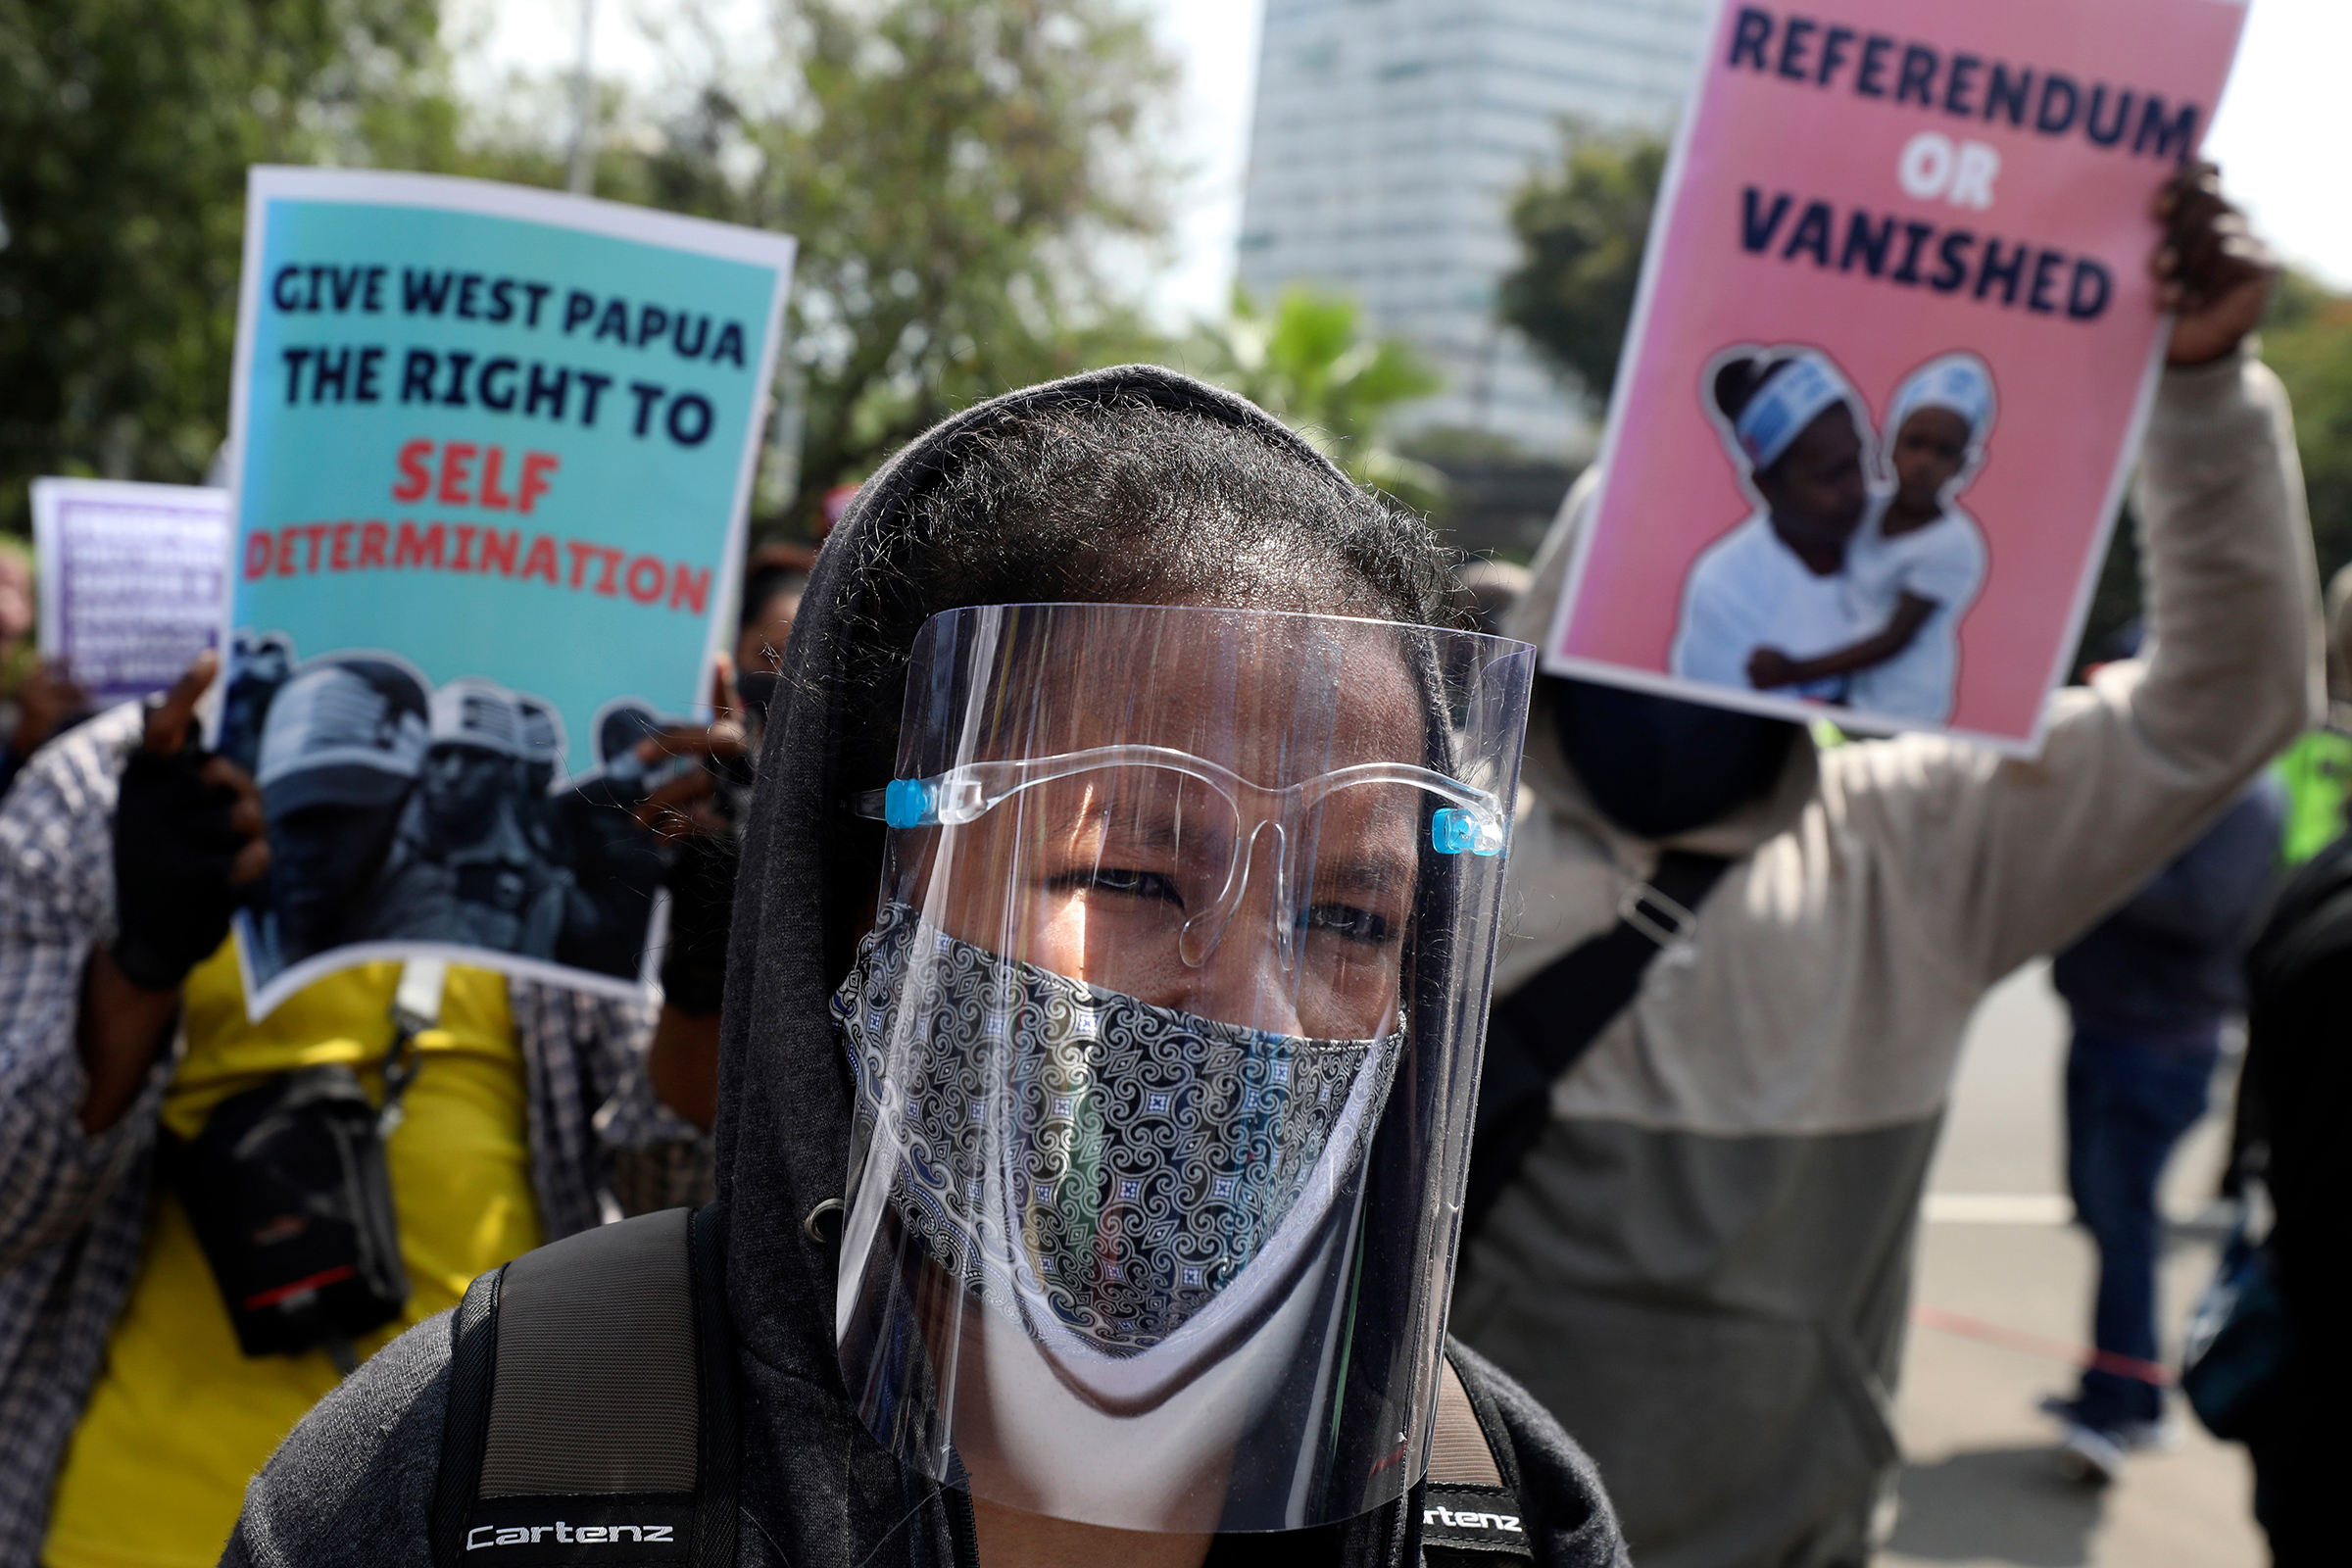 A Papuan pro-independence supporter wears a face shield during a rally commemorating the 58th anniversary of the New York Agreement outside the U.S. Embassy in Jakarta on Aug. 15. The agreement, signed by the Netherlands and Indonesia in 1962, led to Indonesia taking over West Papua from Dutch colonial rule in 1963 (Dita Alangkara—AP)